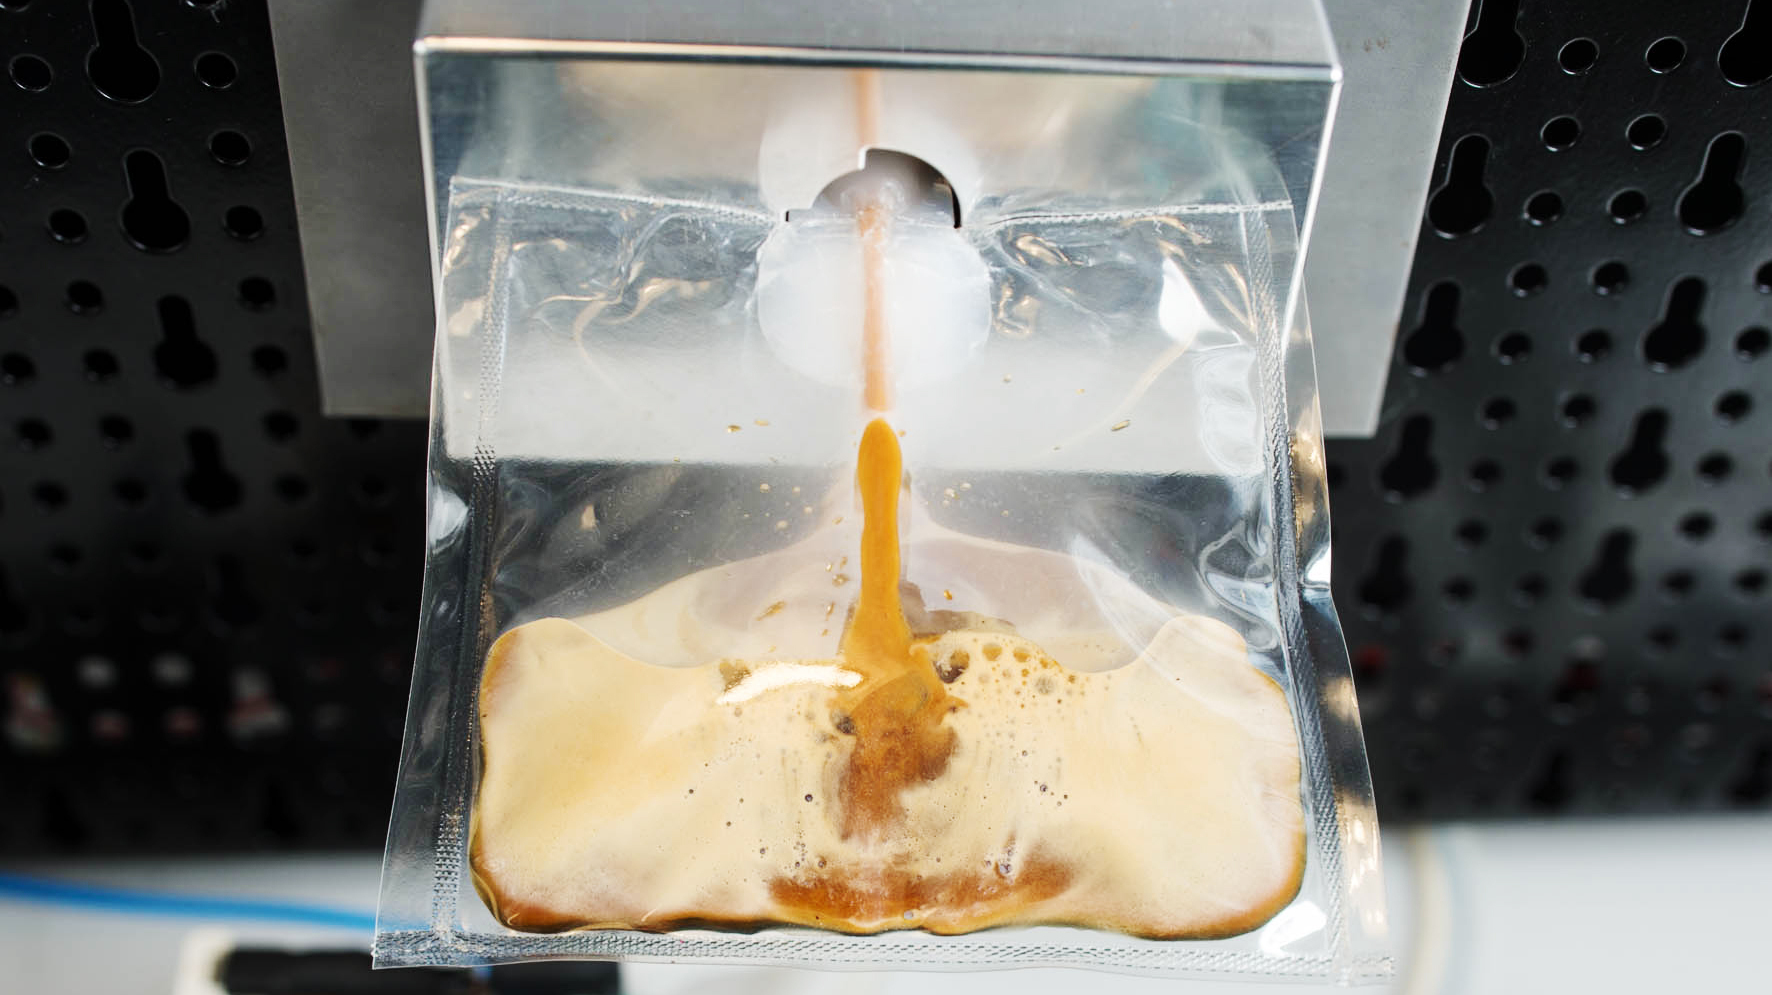 Leave it to the Italians to design a capsule-based espresso system for astronauts who miss their morning cup. Photo: Andrea Guermani/Courtesy of Lavazza